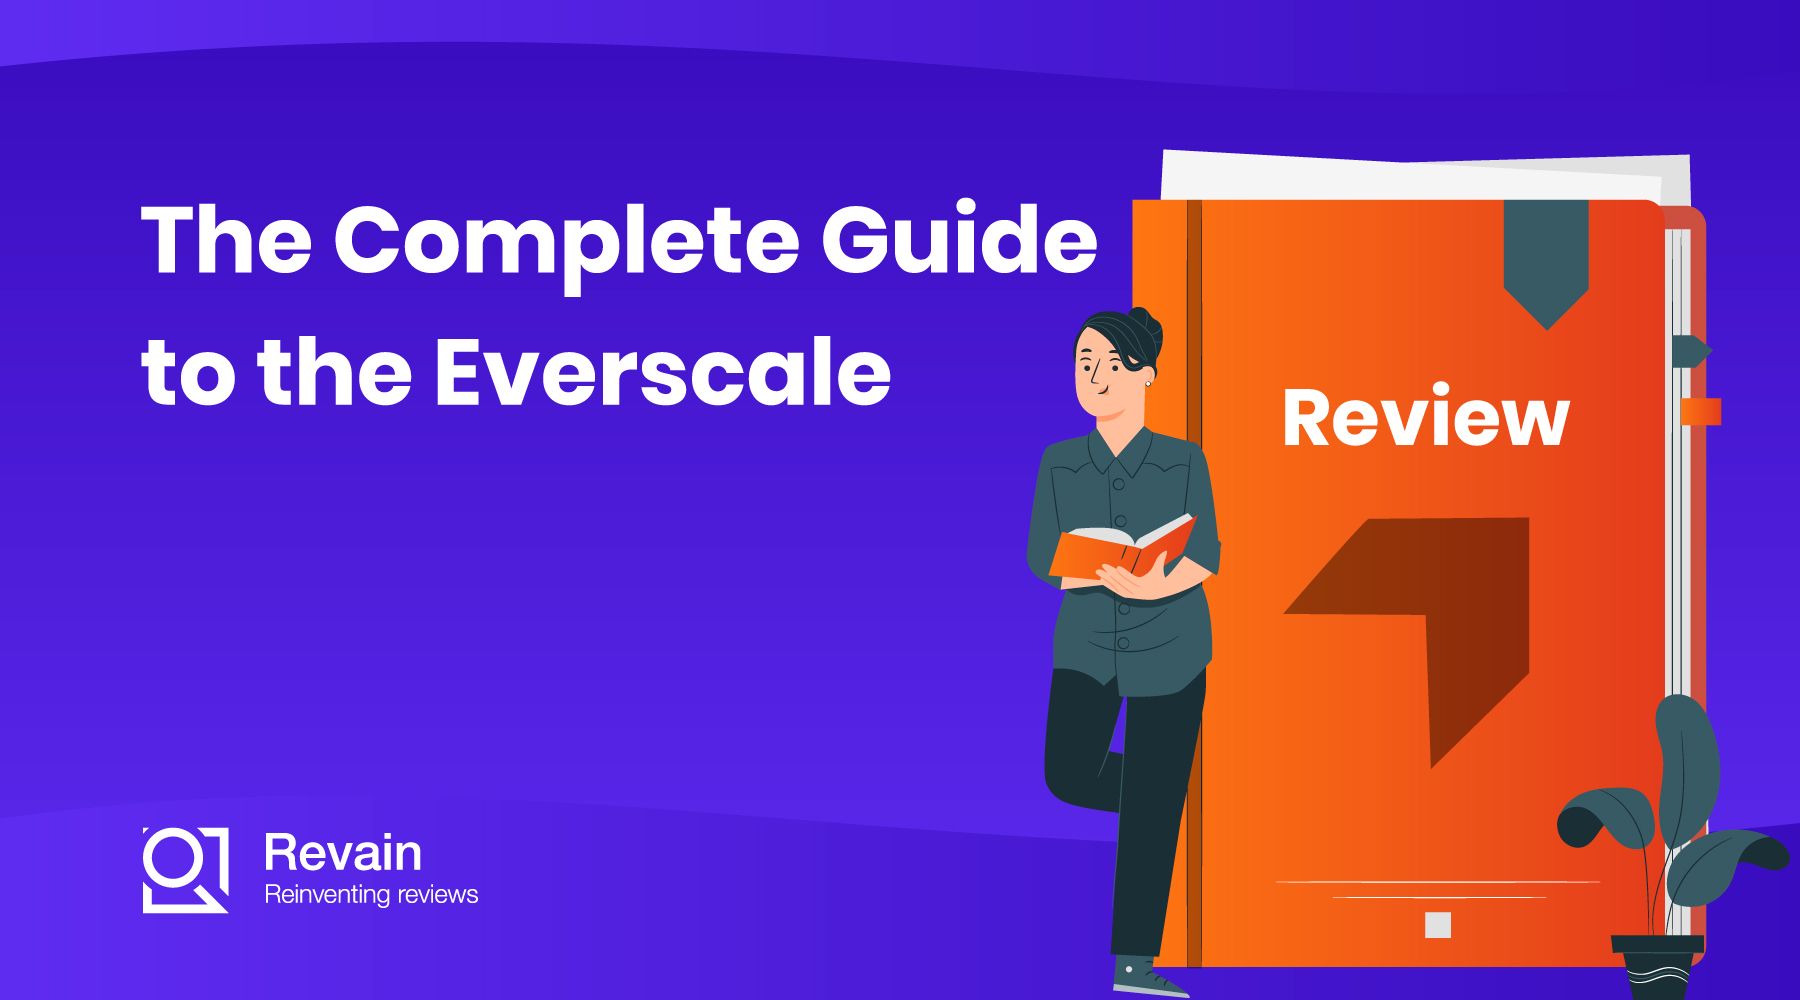 Article The Complete Guide to the Everscale